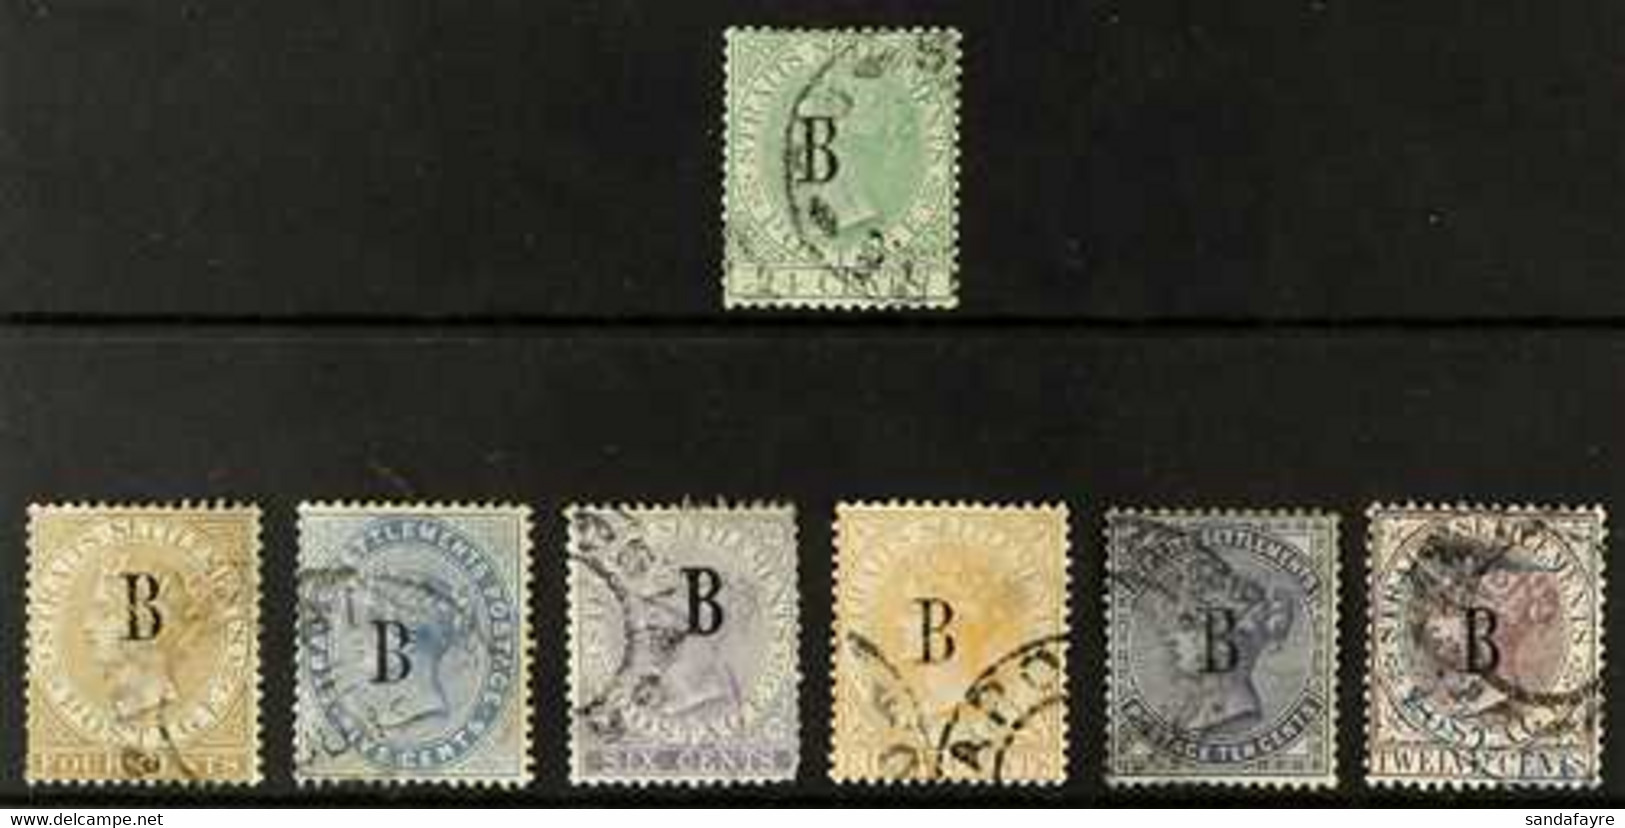 BANGKOK 1882-85 USED GROUP Of All Different Stamps With "B" Overprints, Includes 1882-85 Wmk CC 24c (SG 9) And Wmk CA 4c - Siam